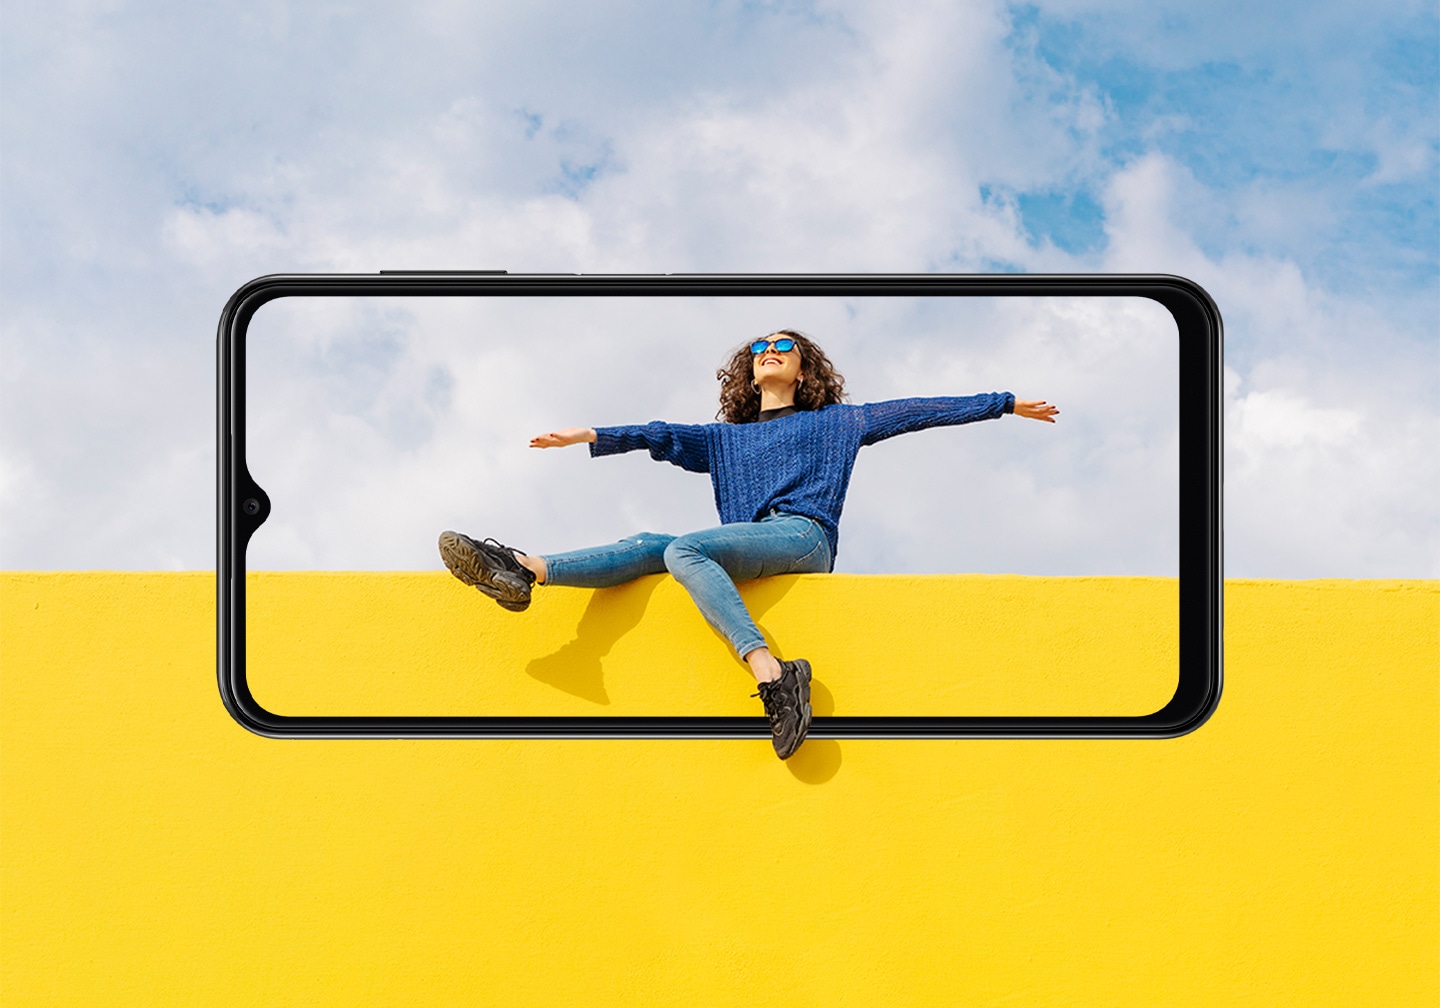 Samsung Galaxy A13 specs and features. Display specs, a scene of a young woman sitting on yellow wall against cloudy sky looking up. Her legs and the wall and sky extend outside of the display.